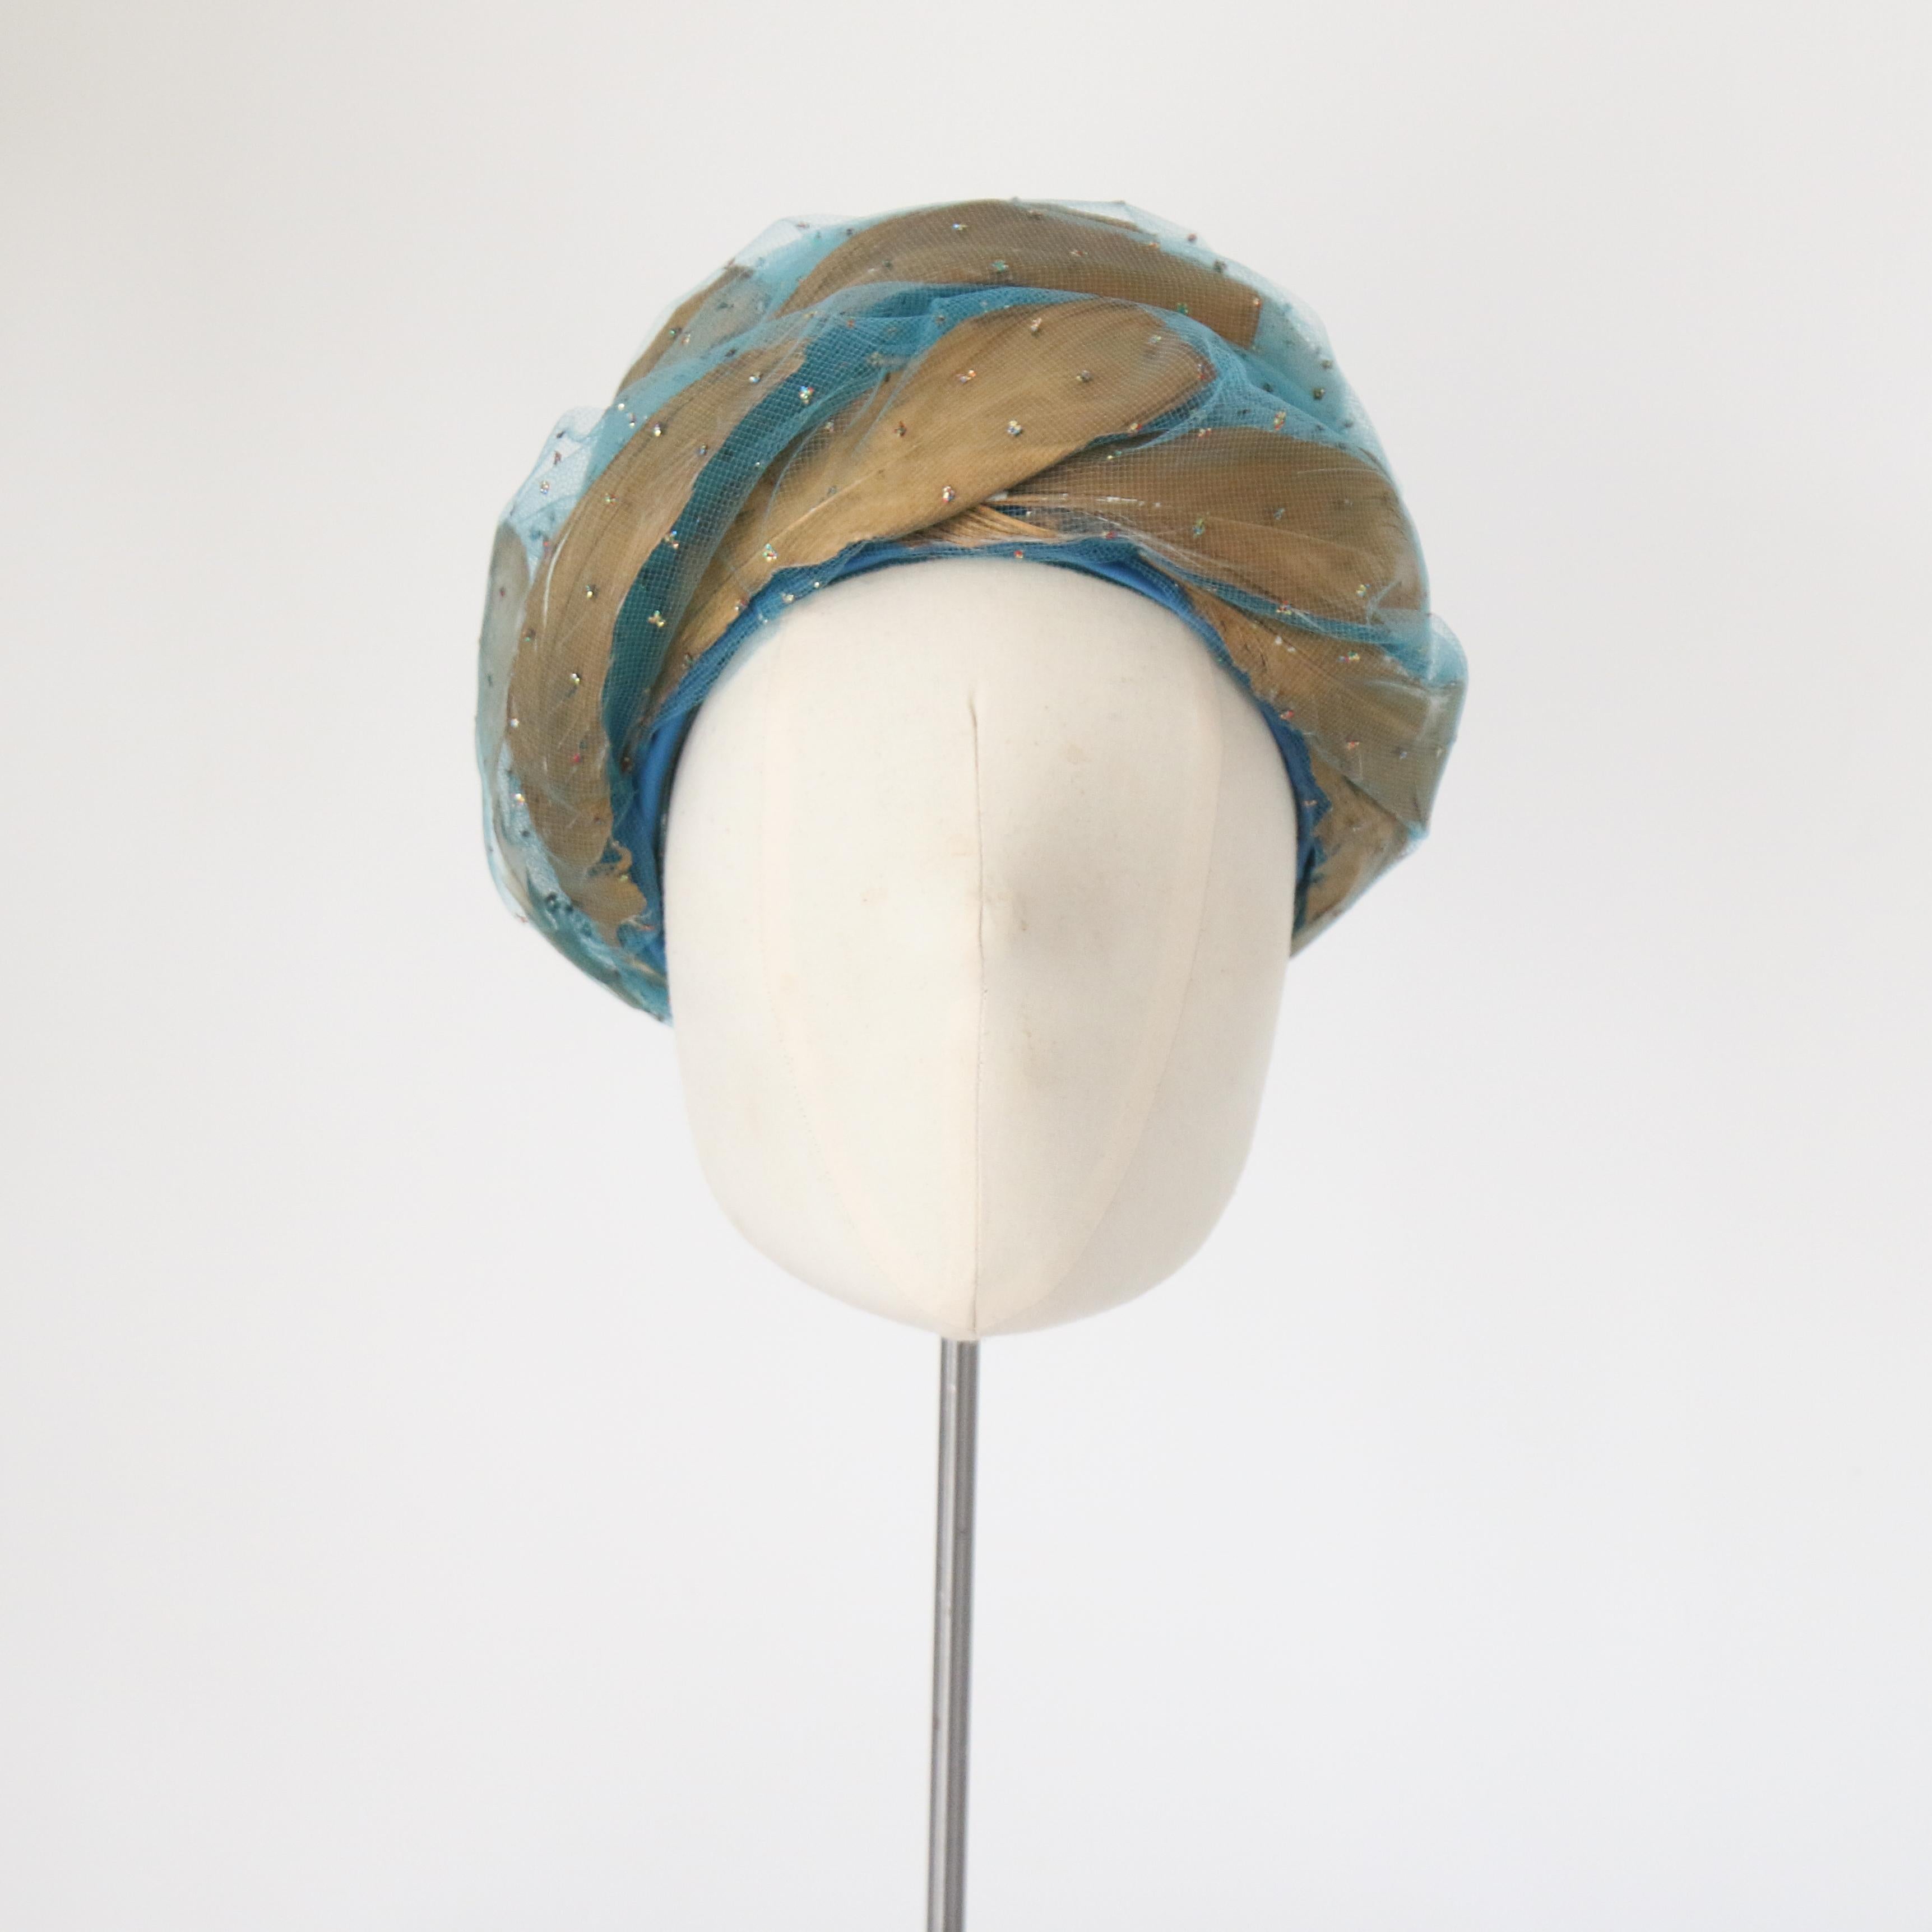 This breathtaking 1960's Christian Dior turquoise tulle turban hat in a structural spiral design with interwoven metallic gold feathers, finished with iridescent multi-coloured glitter dots is a rare piece to behold, and sculptural marvel. 

Label: